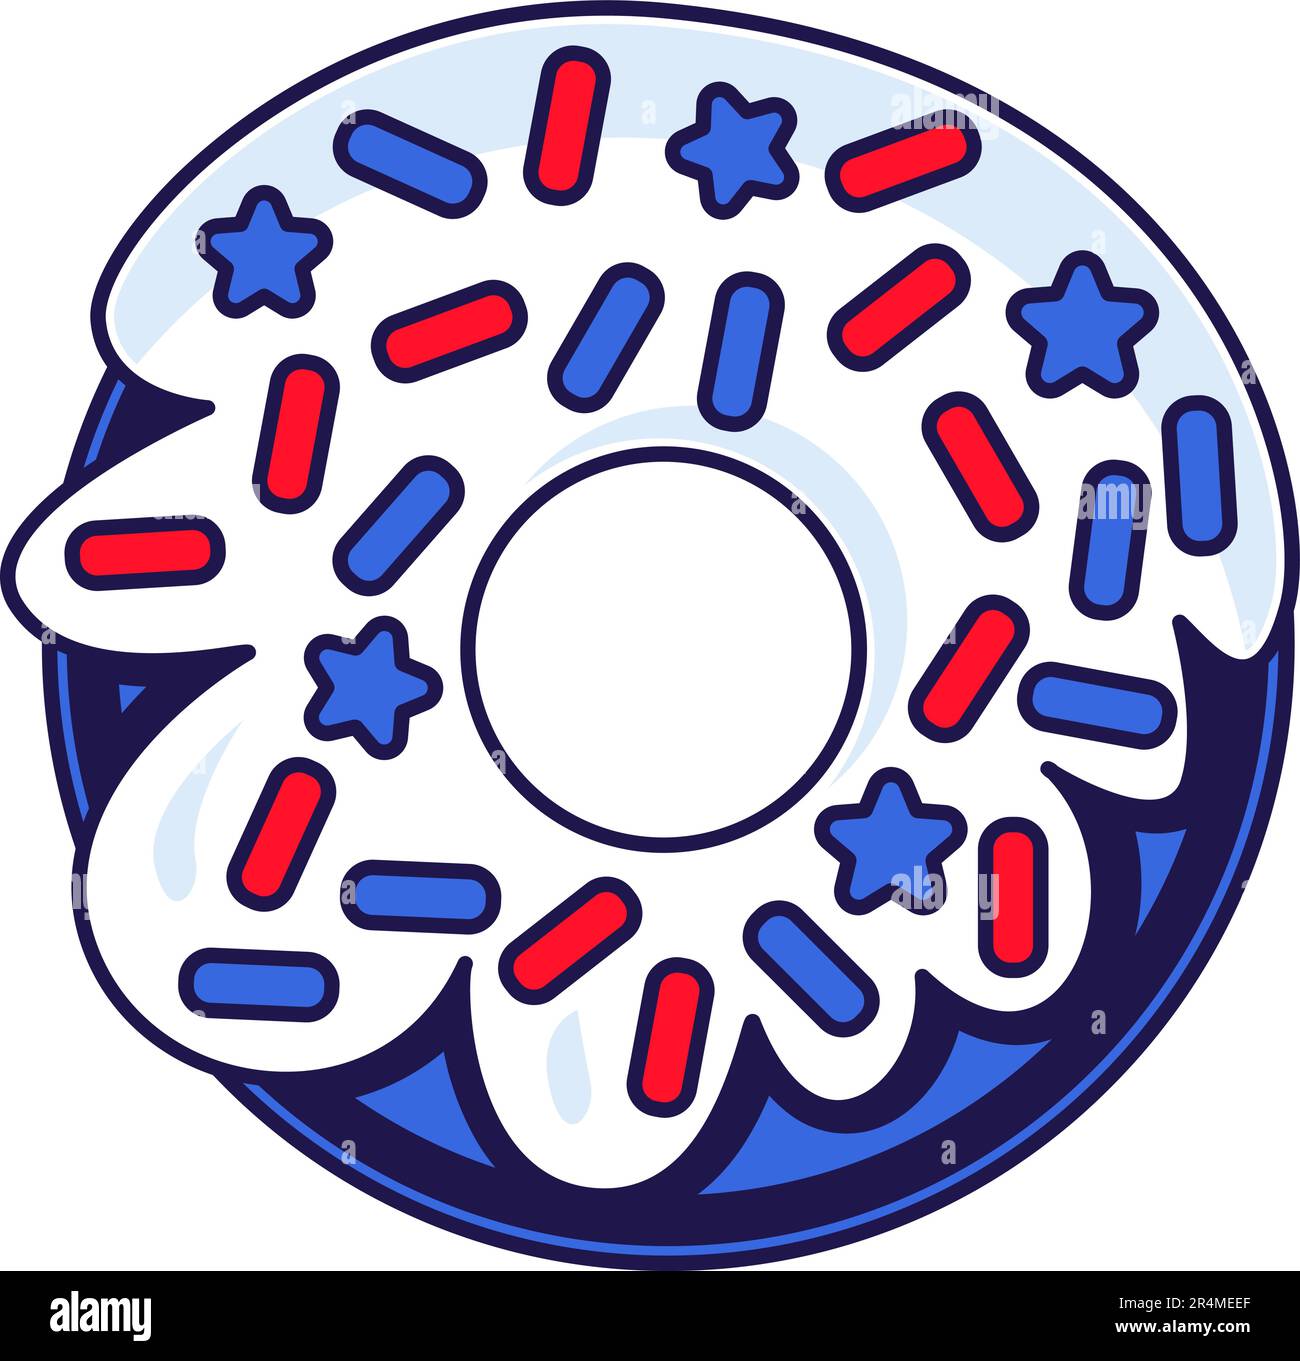 Sweet biscuit glazed donut with sprinkling of star sticks. Festive element, attributes of July 4th American Independence Day. Cartoon vector icon in n Stock Vector